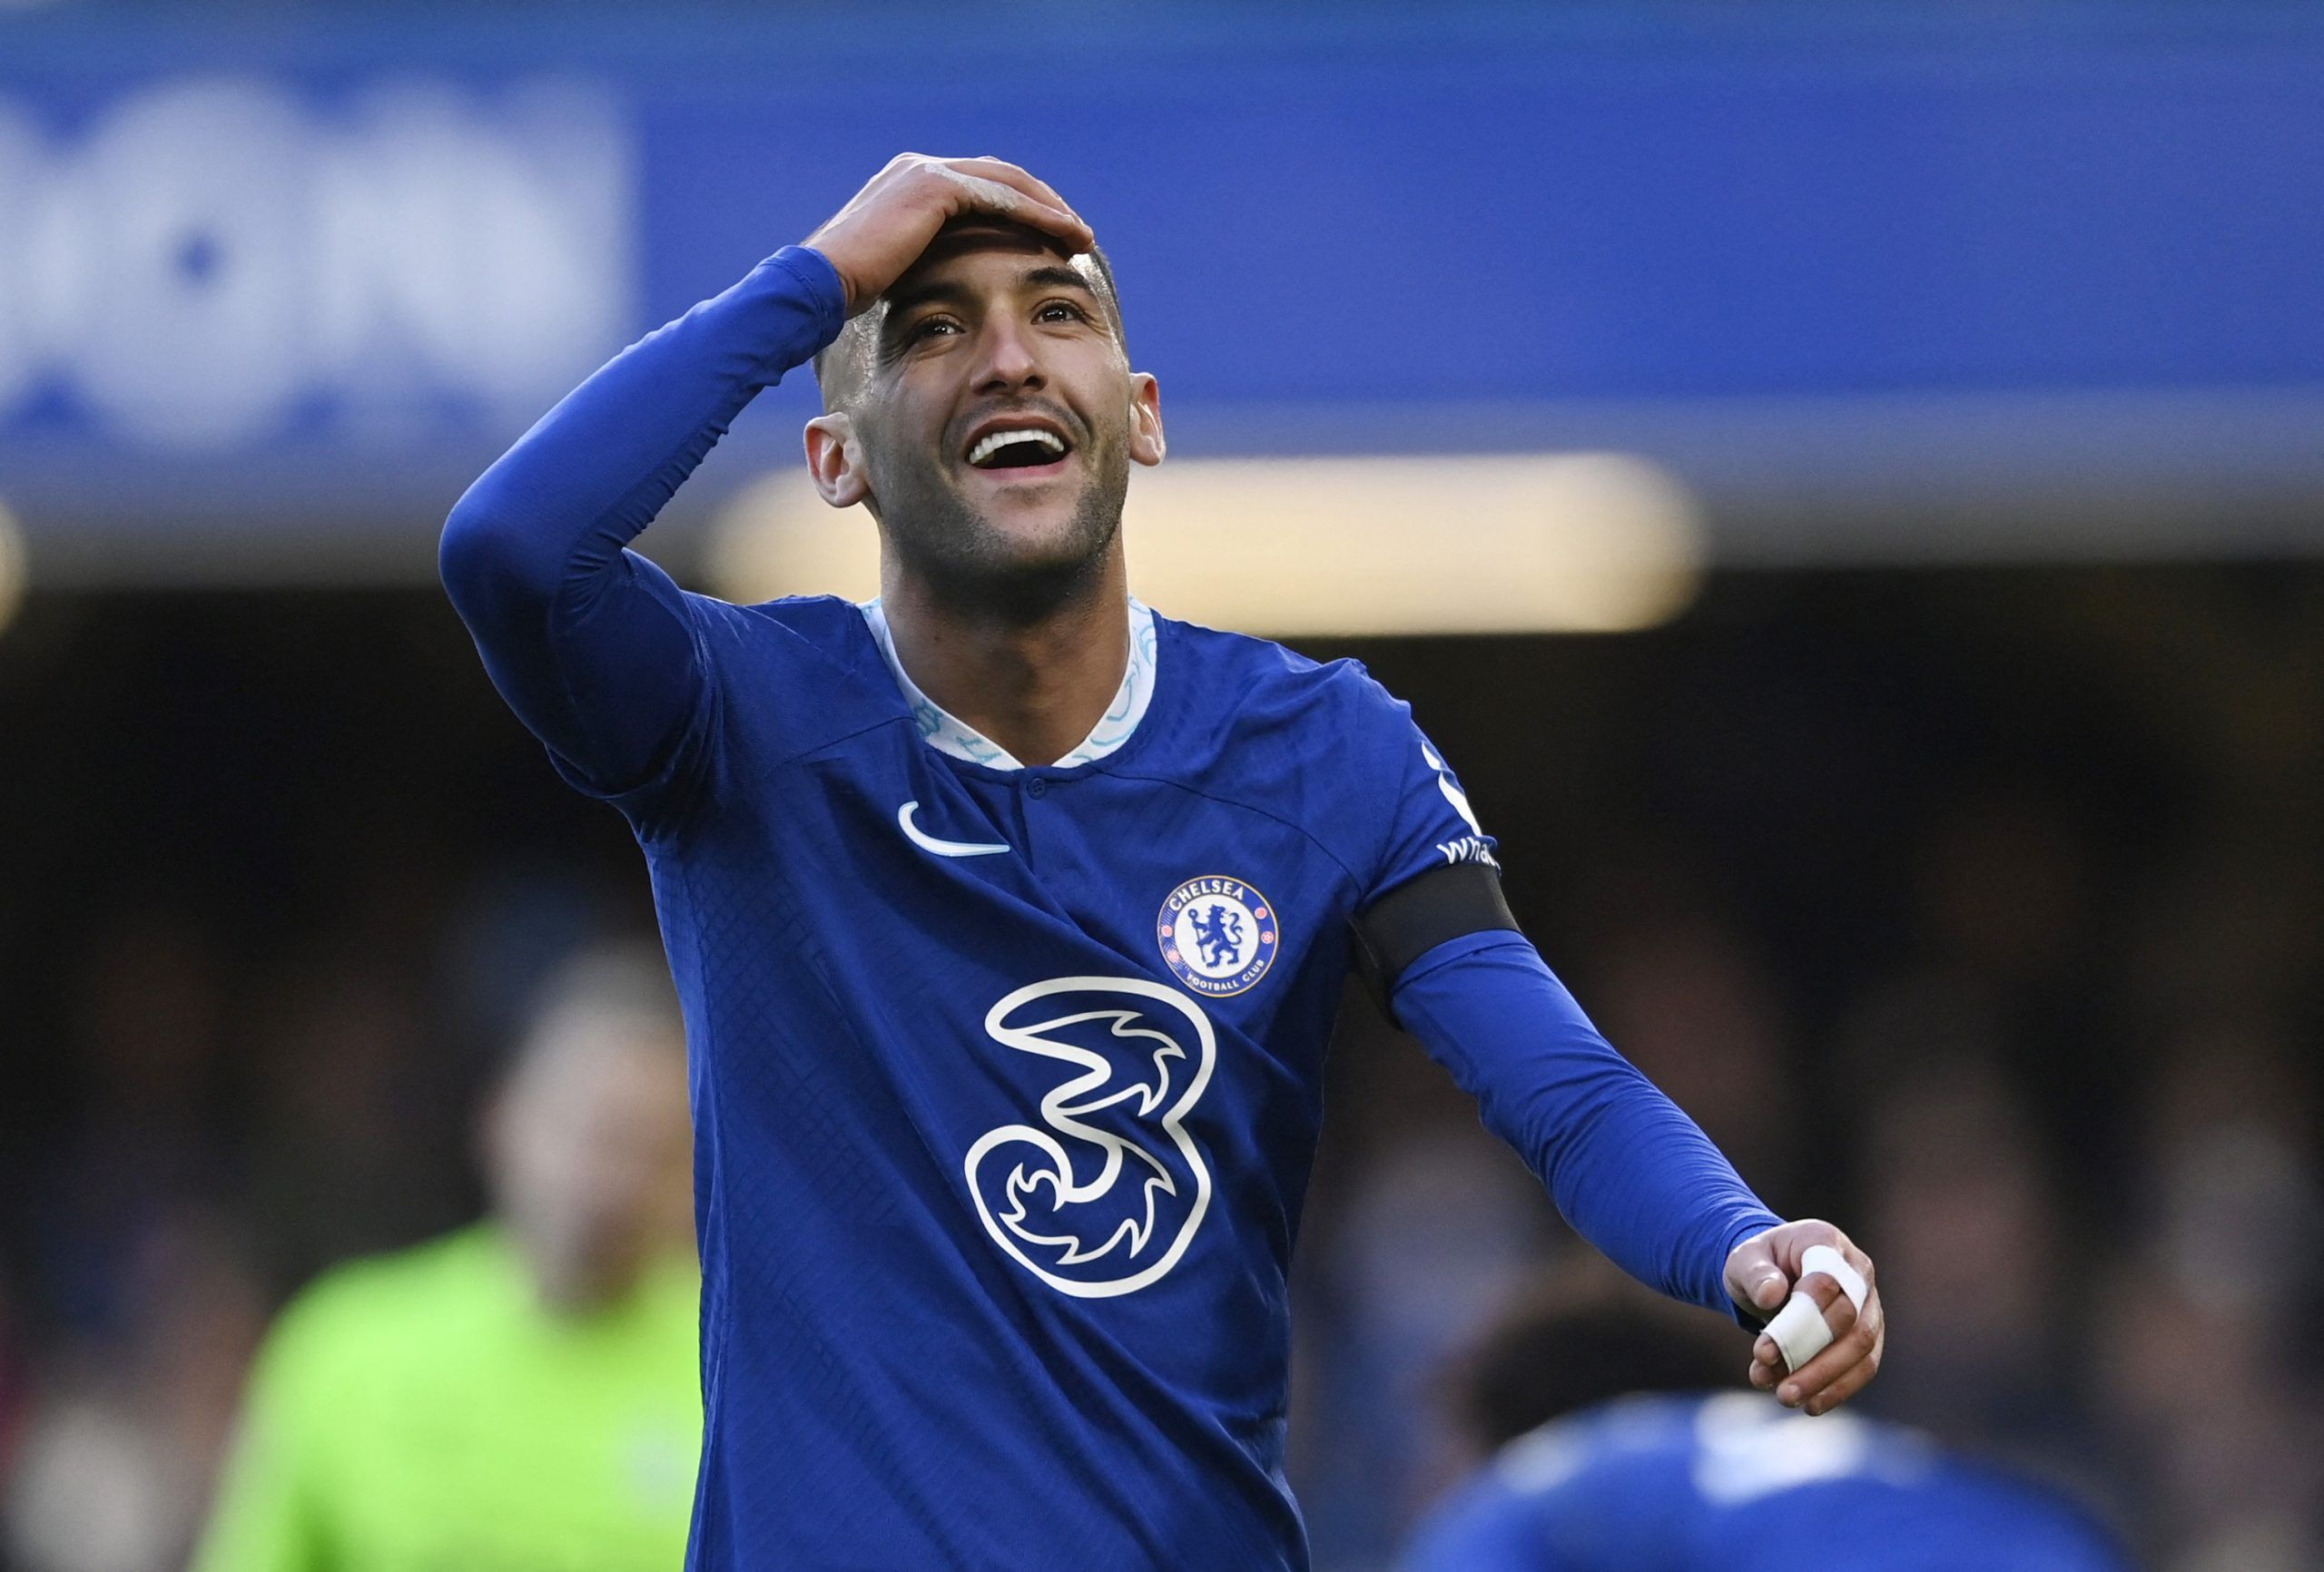 hakim-ziyech-chelsea-crystal-palace-performance-in-numbers-graham-potter-premier-league